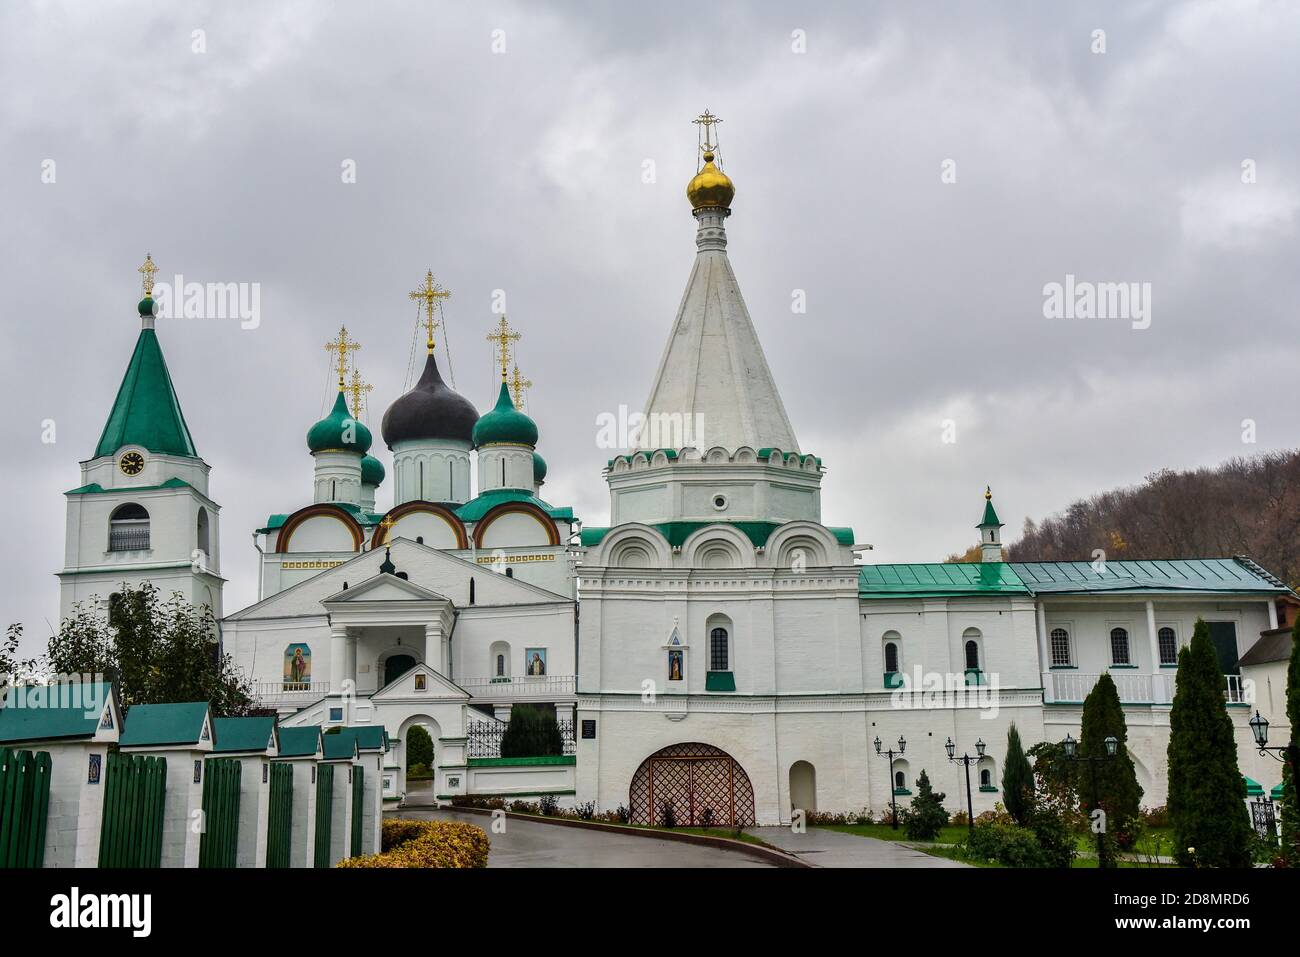 Pechersky Ascension monastery in Nizhny Novgorod. It is an important spiritual and religious center of the principality and the seat of the Bishop. Stock Photo